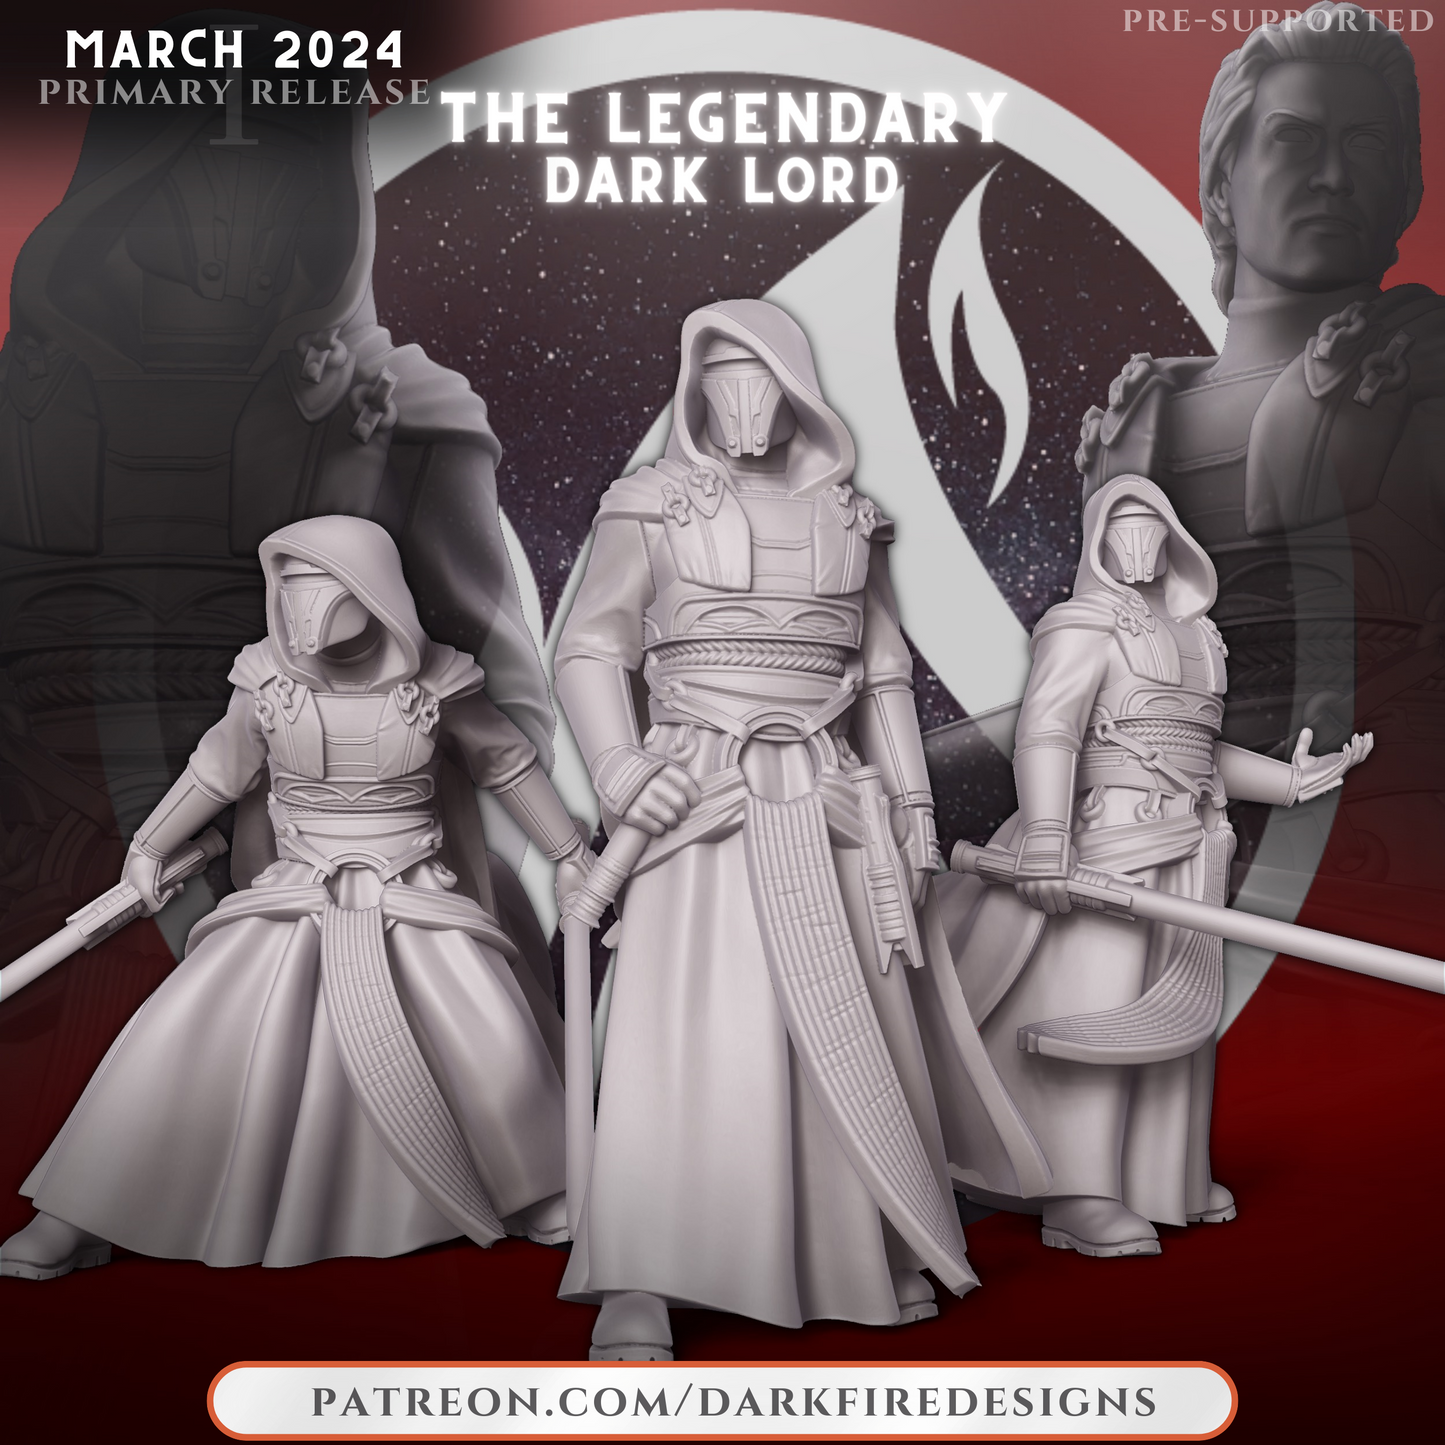 March 2024 Secondary Patreon.com Release